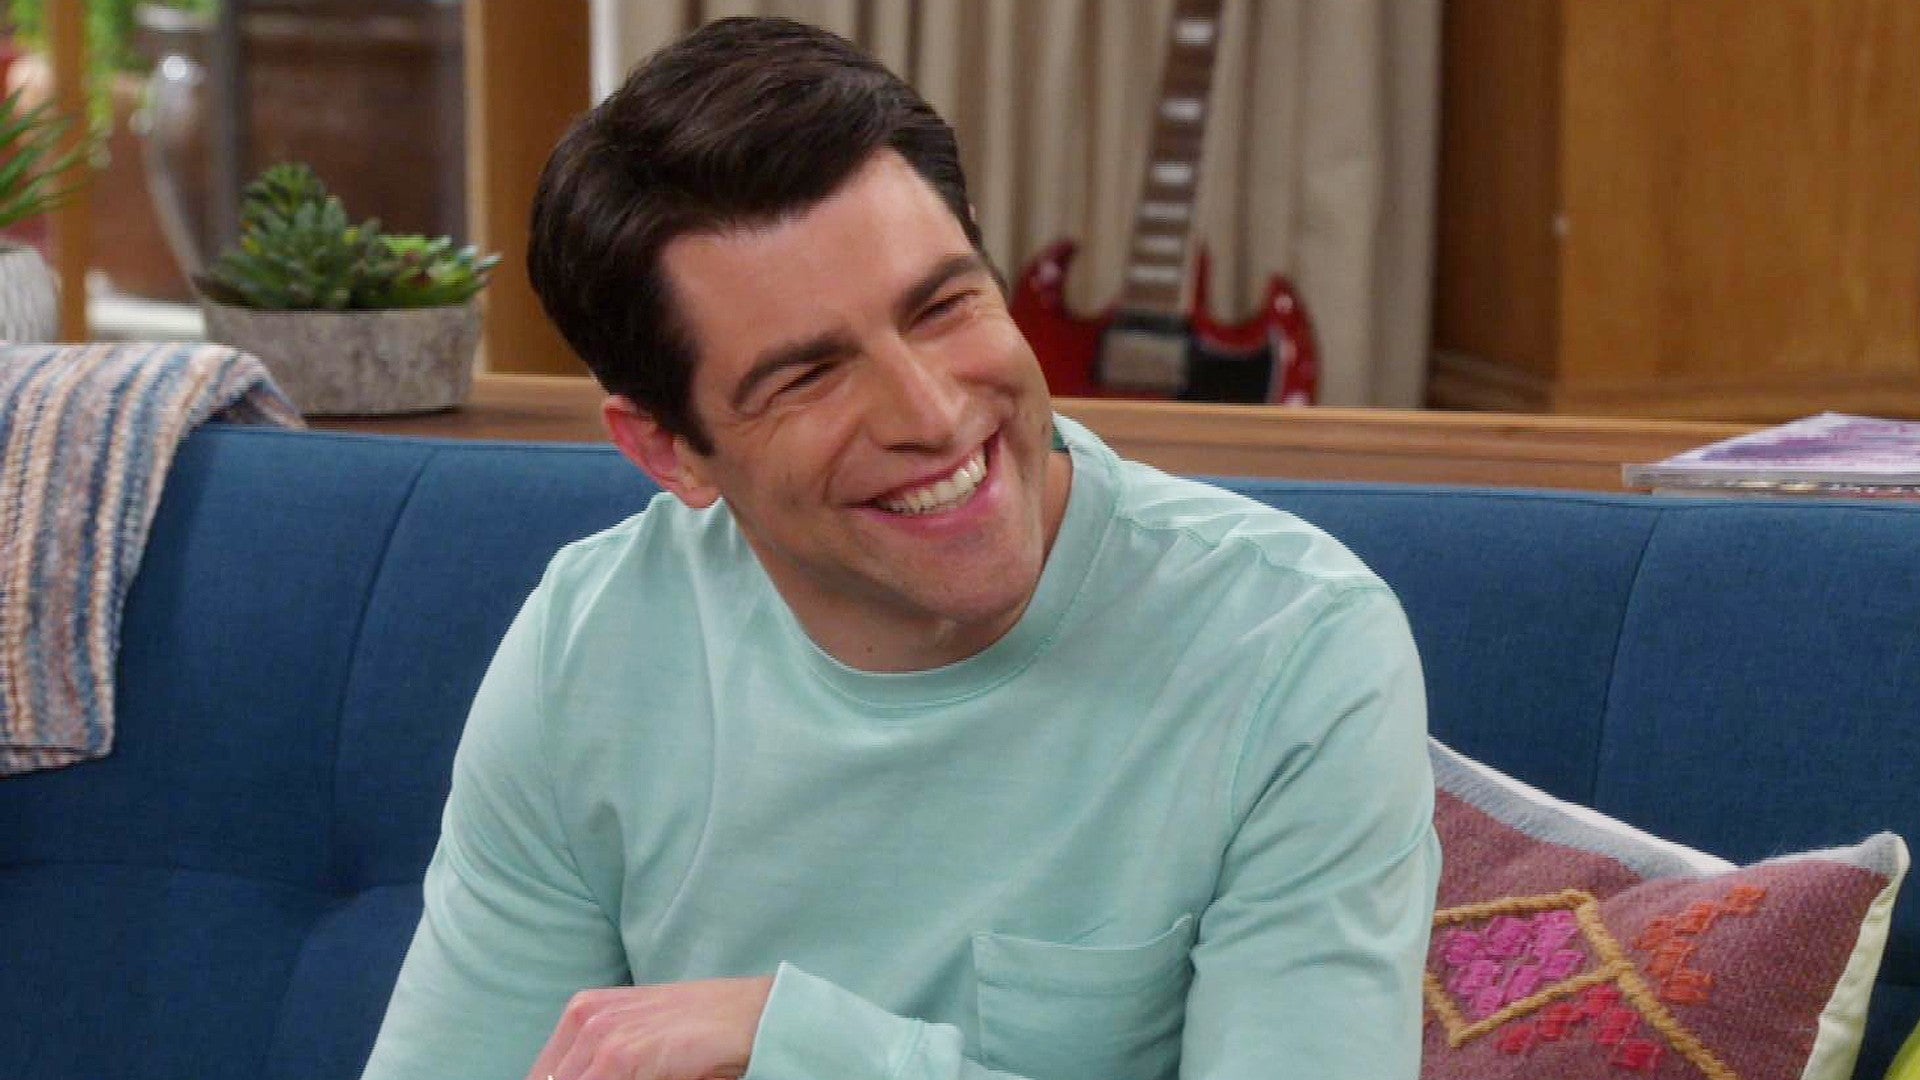 Max Greenfield as Dave Johnson